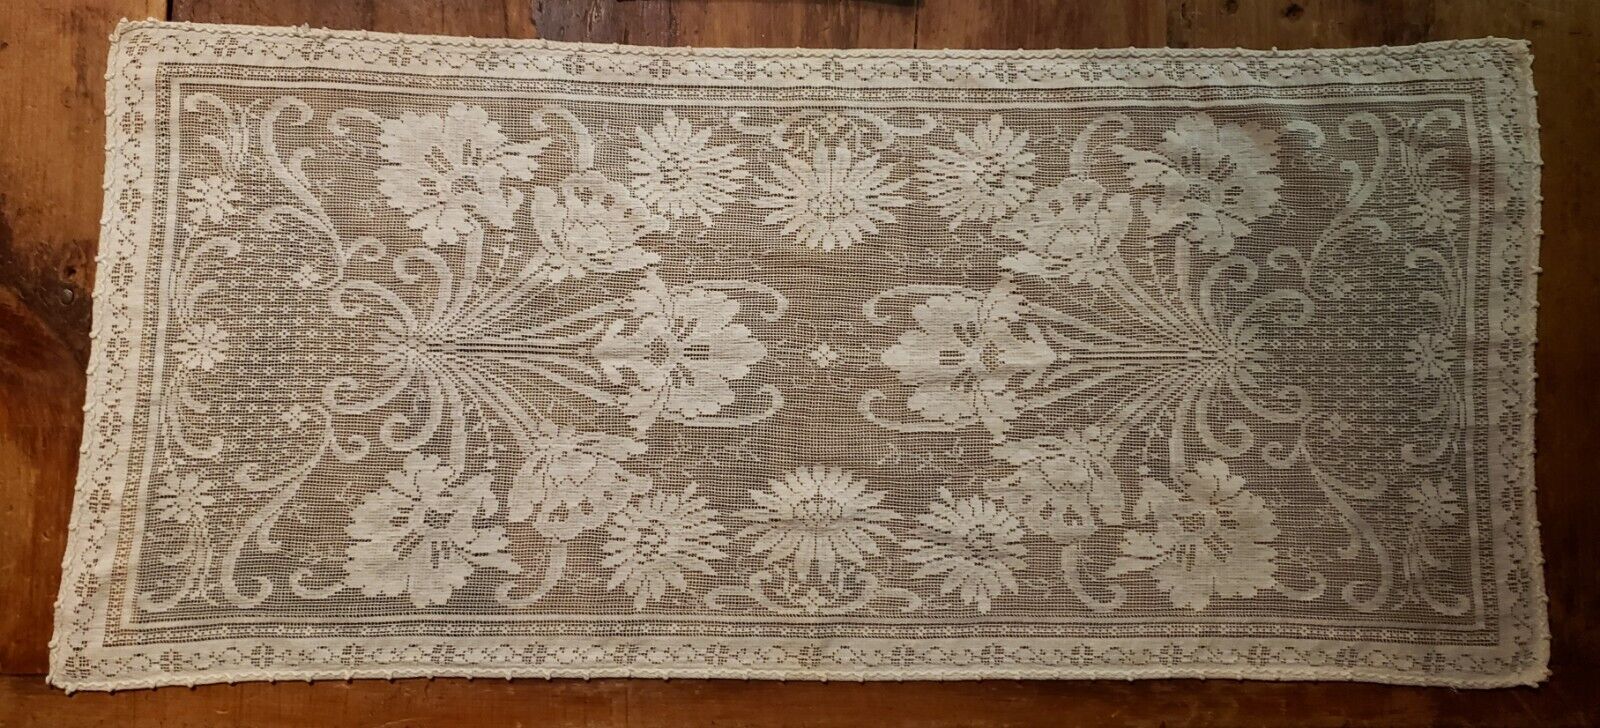 Antique Victorian Lace Table Runner / Dresser Scarf 14.5\